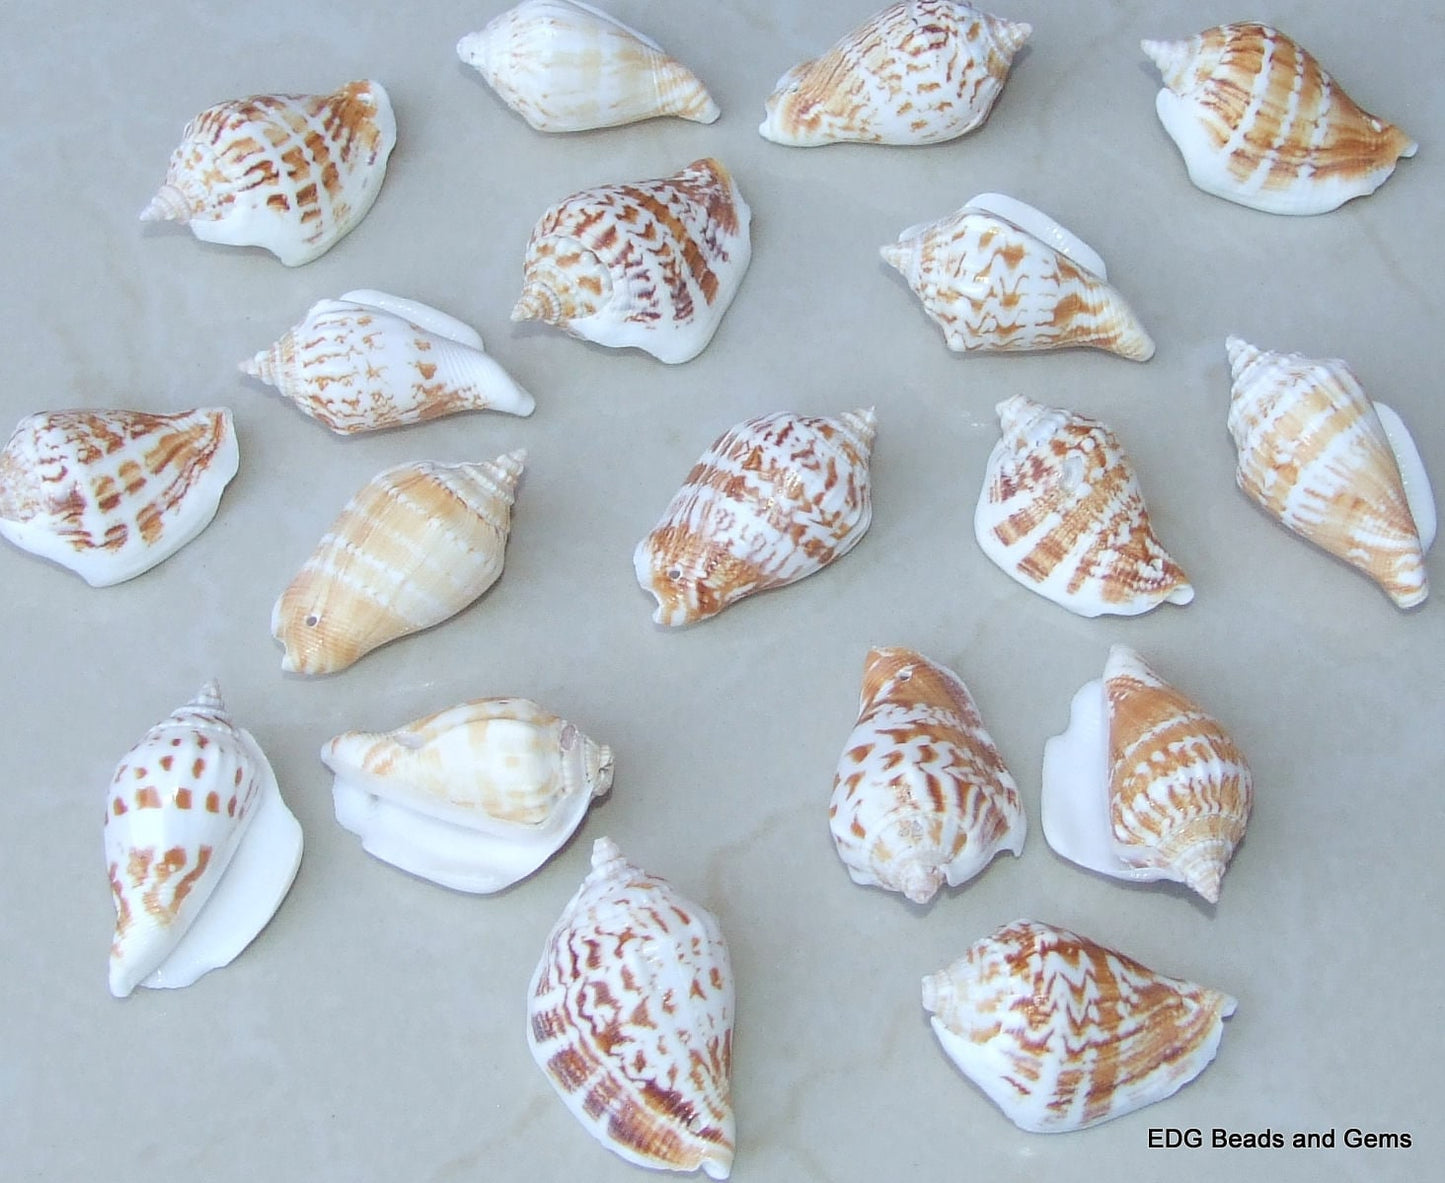 4 Large Natural Conch Sea Shell, Spiral Shell Bead, Seashell, Shell Bead, Beach Decor, Ocean Shell, Beach Jewelry, 40mm - 45mm - 007-57